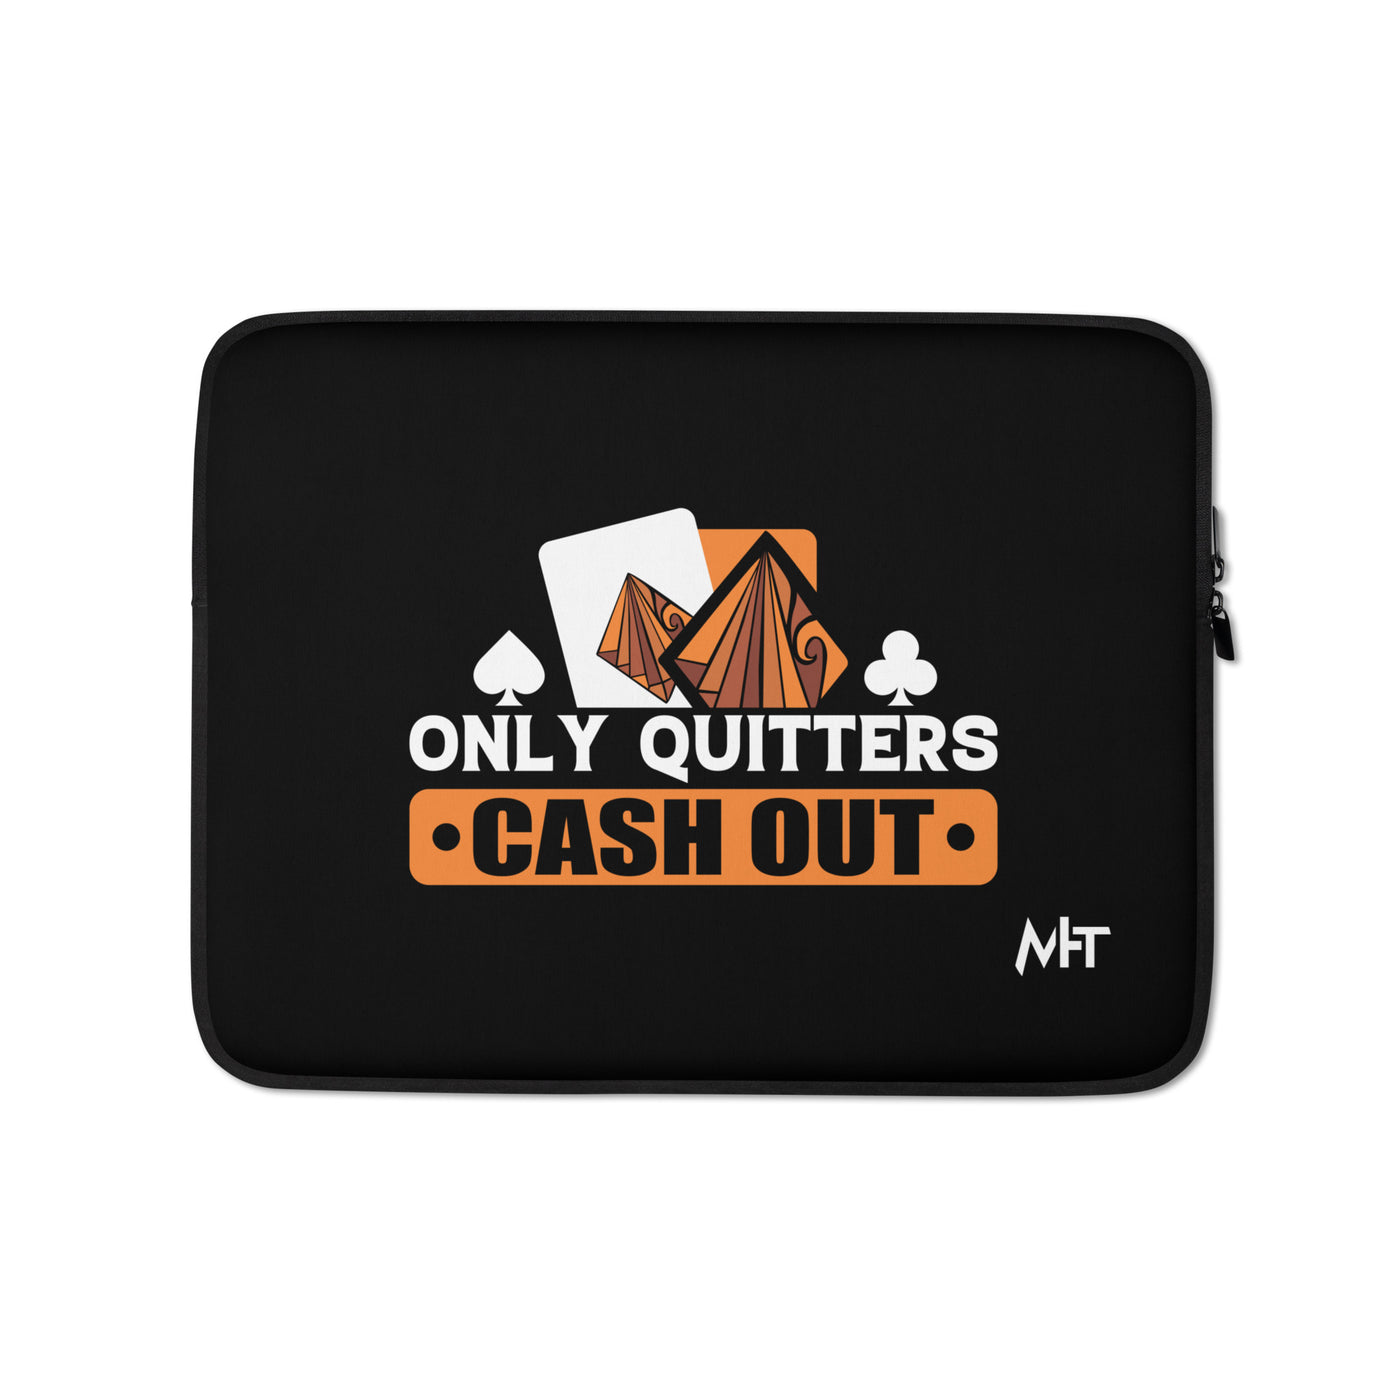 Only Quitters Cash Out - Laptop Sleeve